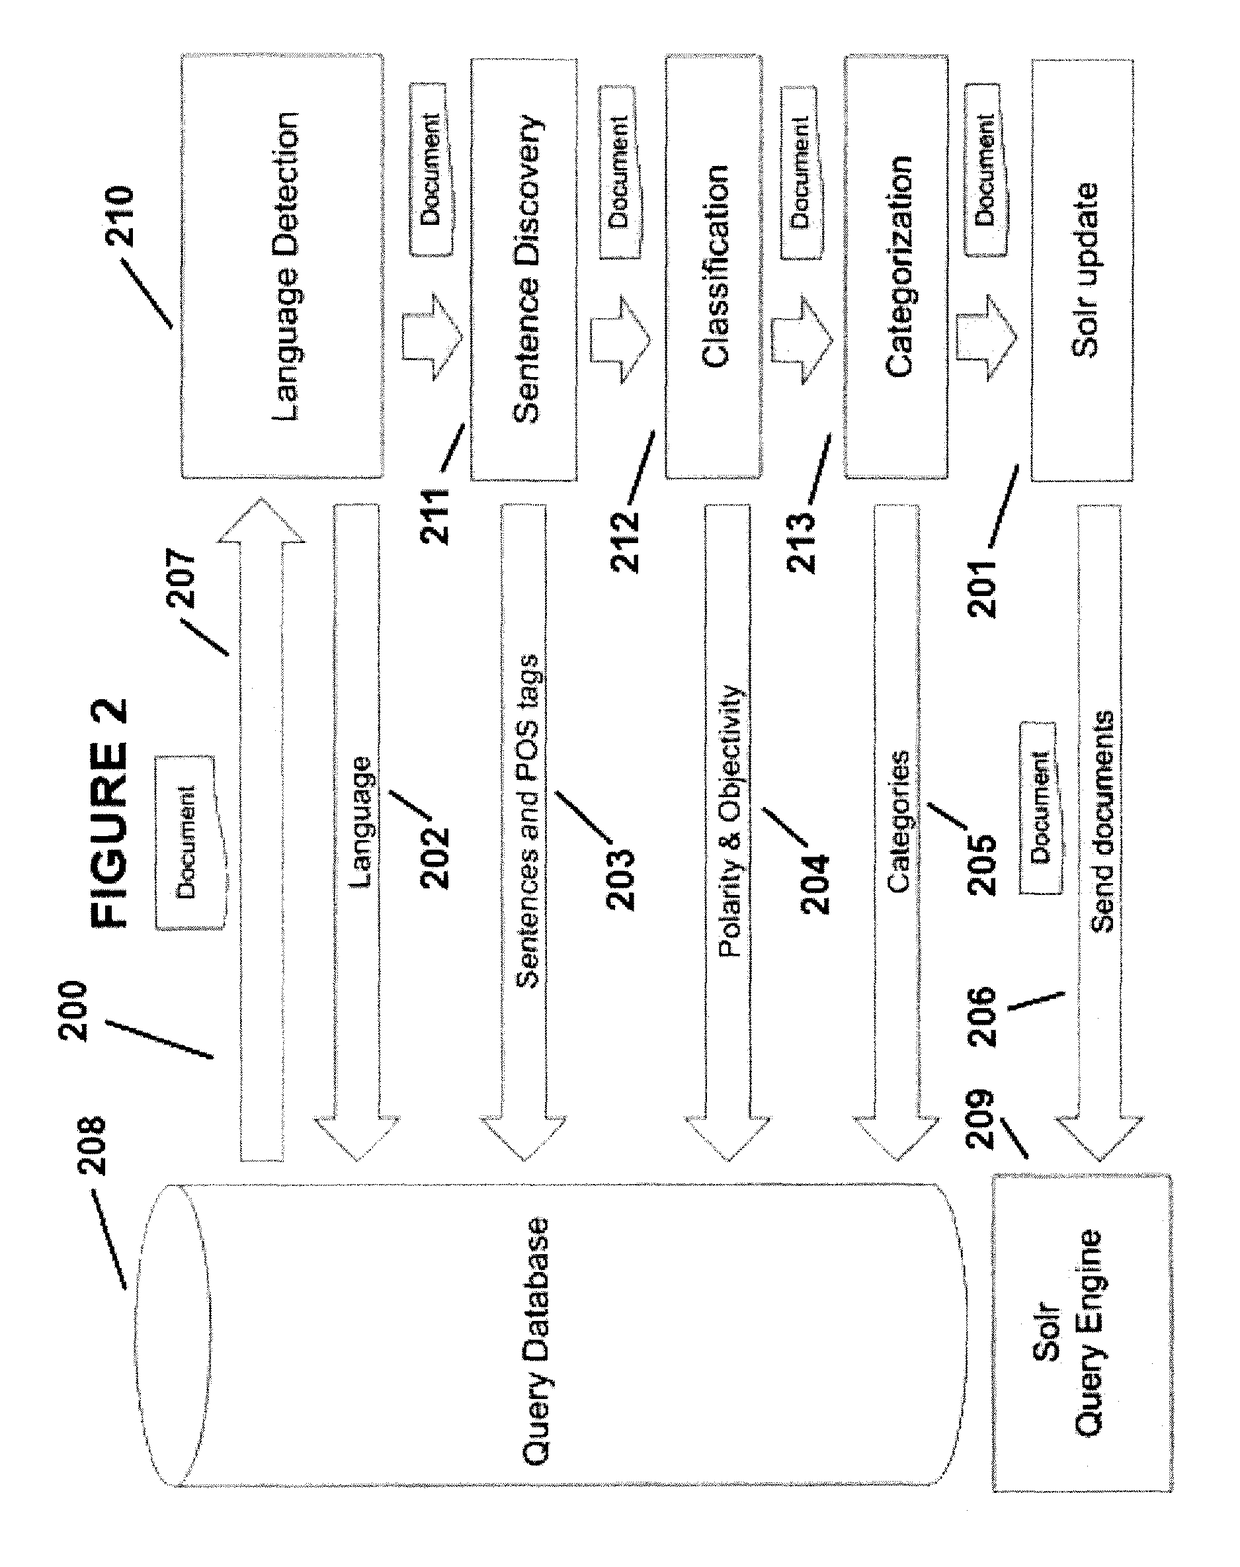 Method and system for monitoring social media and analyzing text to automate classification of user posts using a facet based relevance assessment model